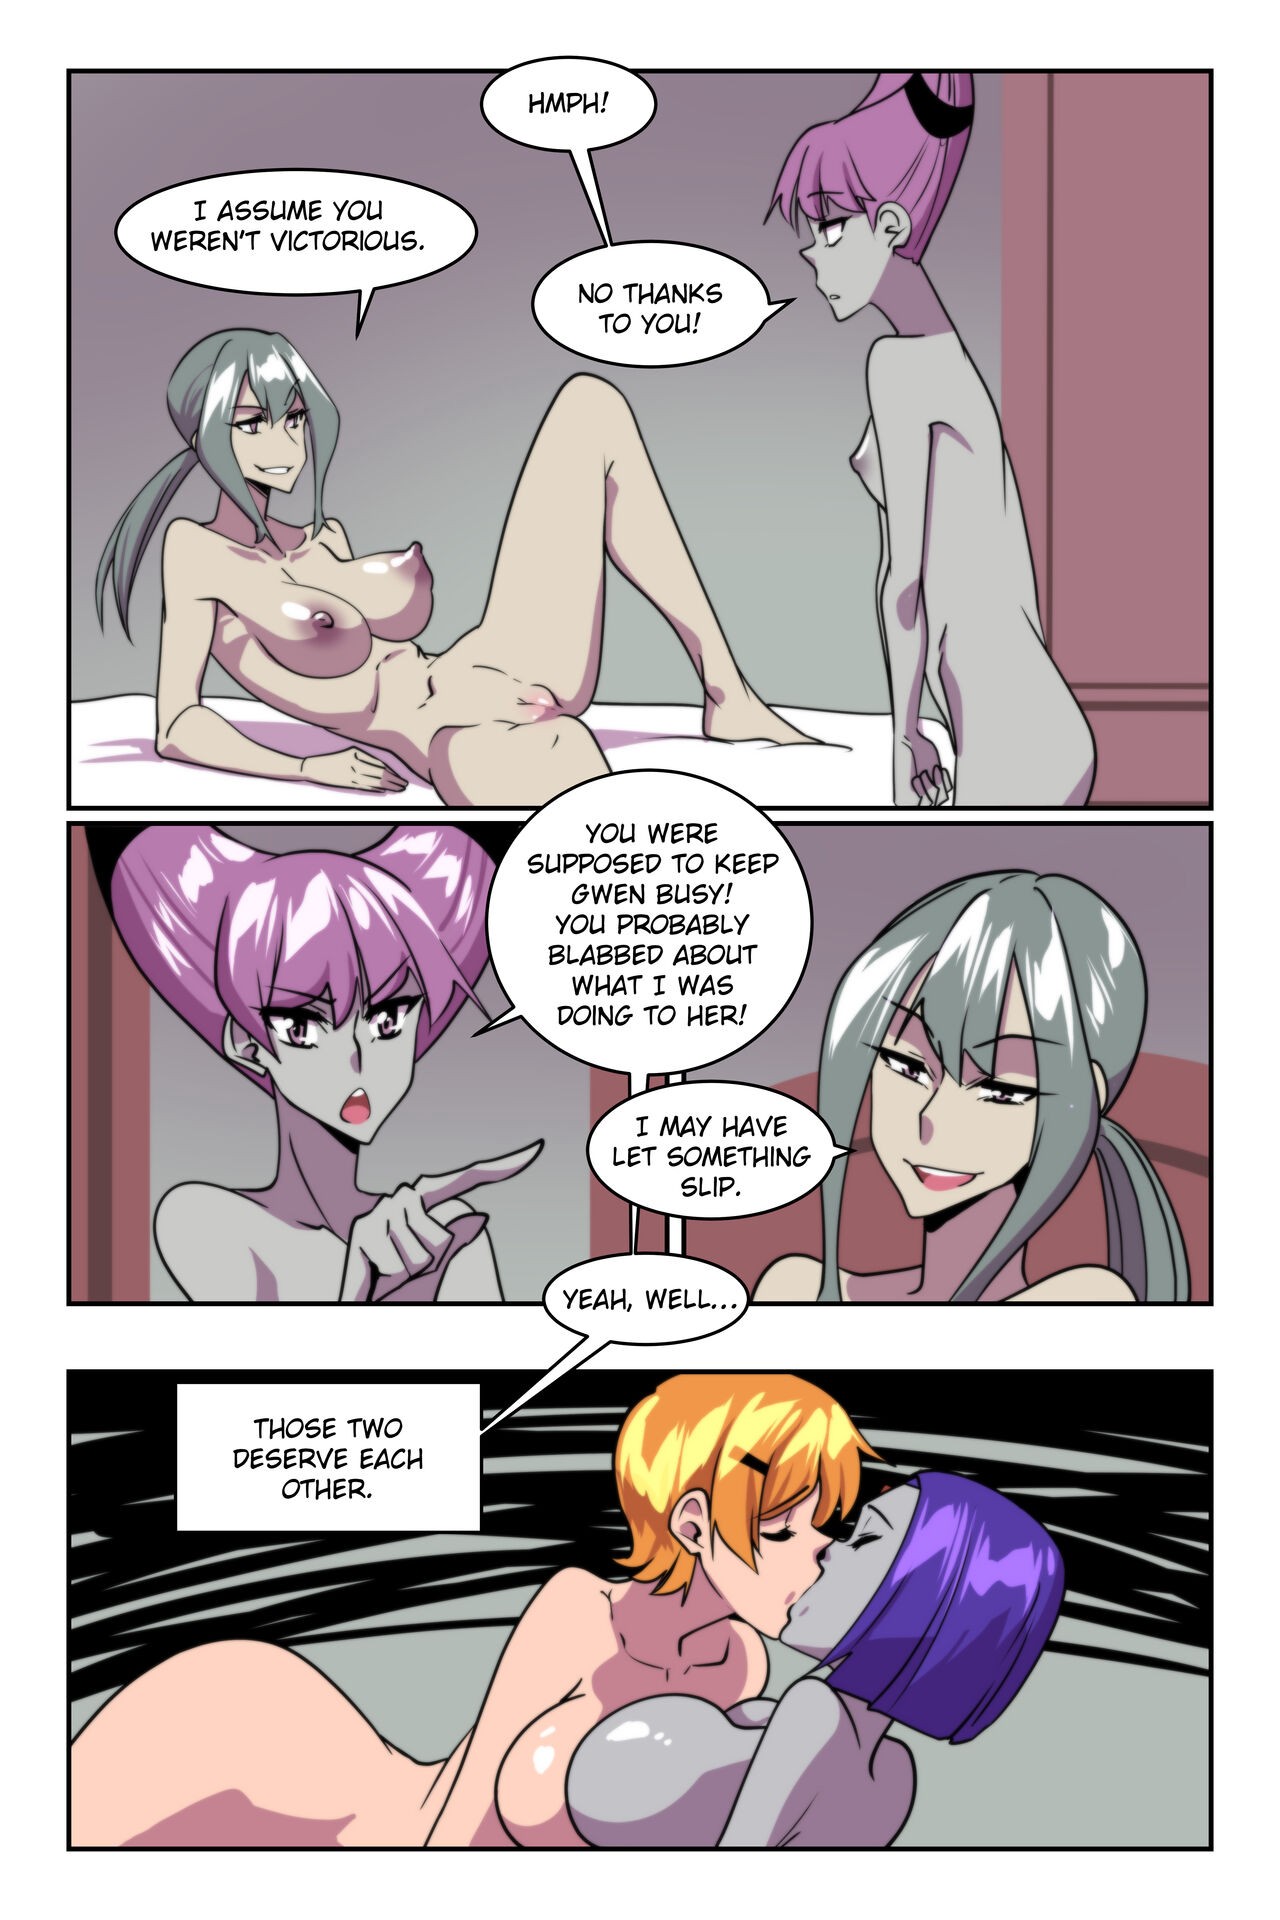 Raven And Gwen’s Magical Adventures Part 6 Porn Comic english 02